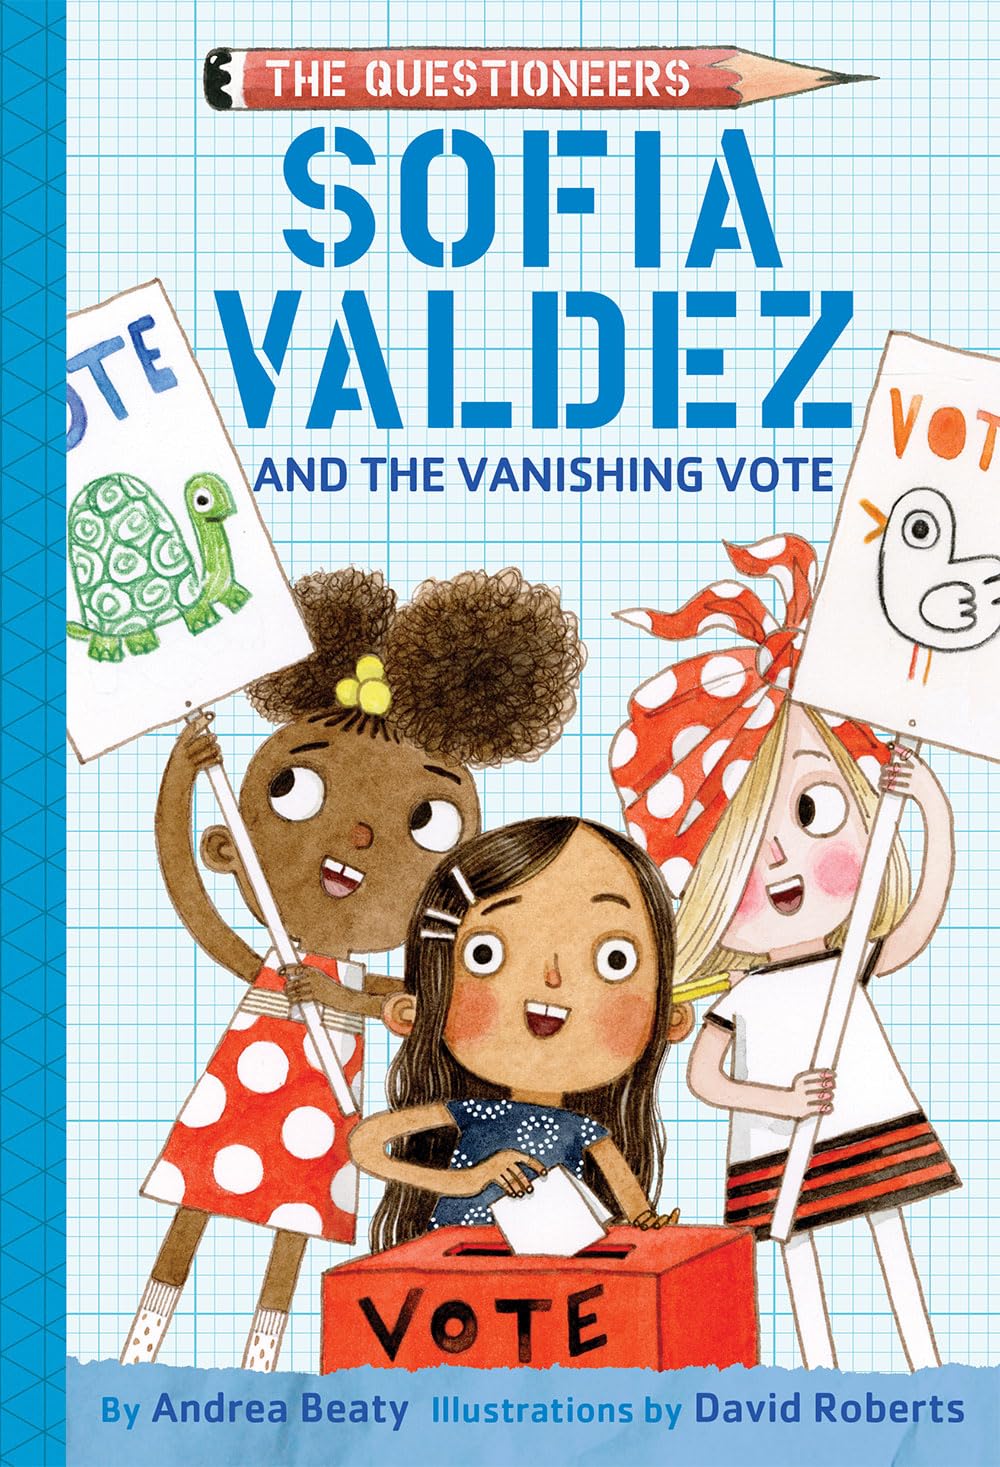 Sofia Valdez and the Vanishing Vote by by Andrea Beaty, illustrated by David Roberts